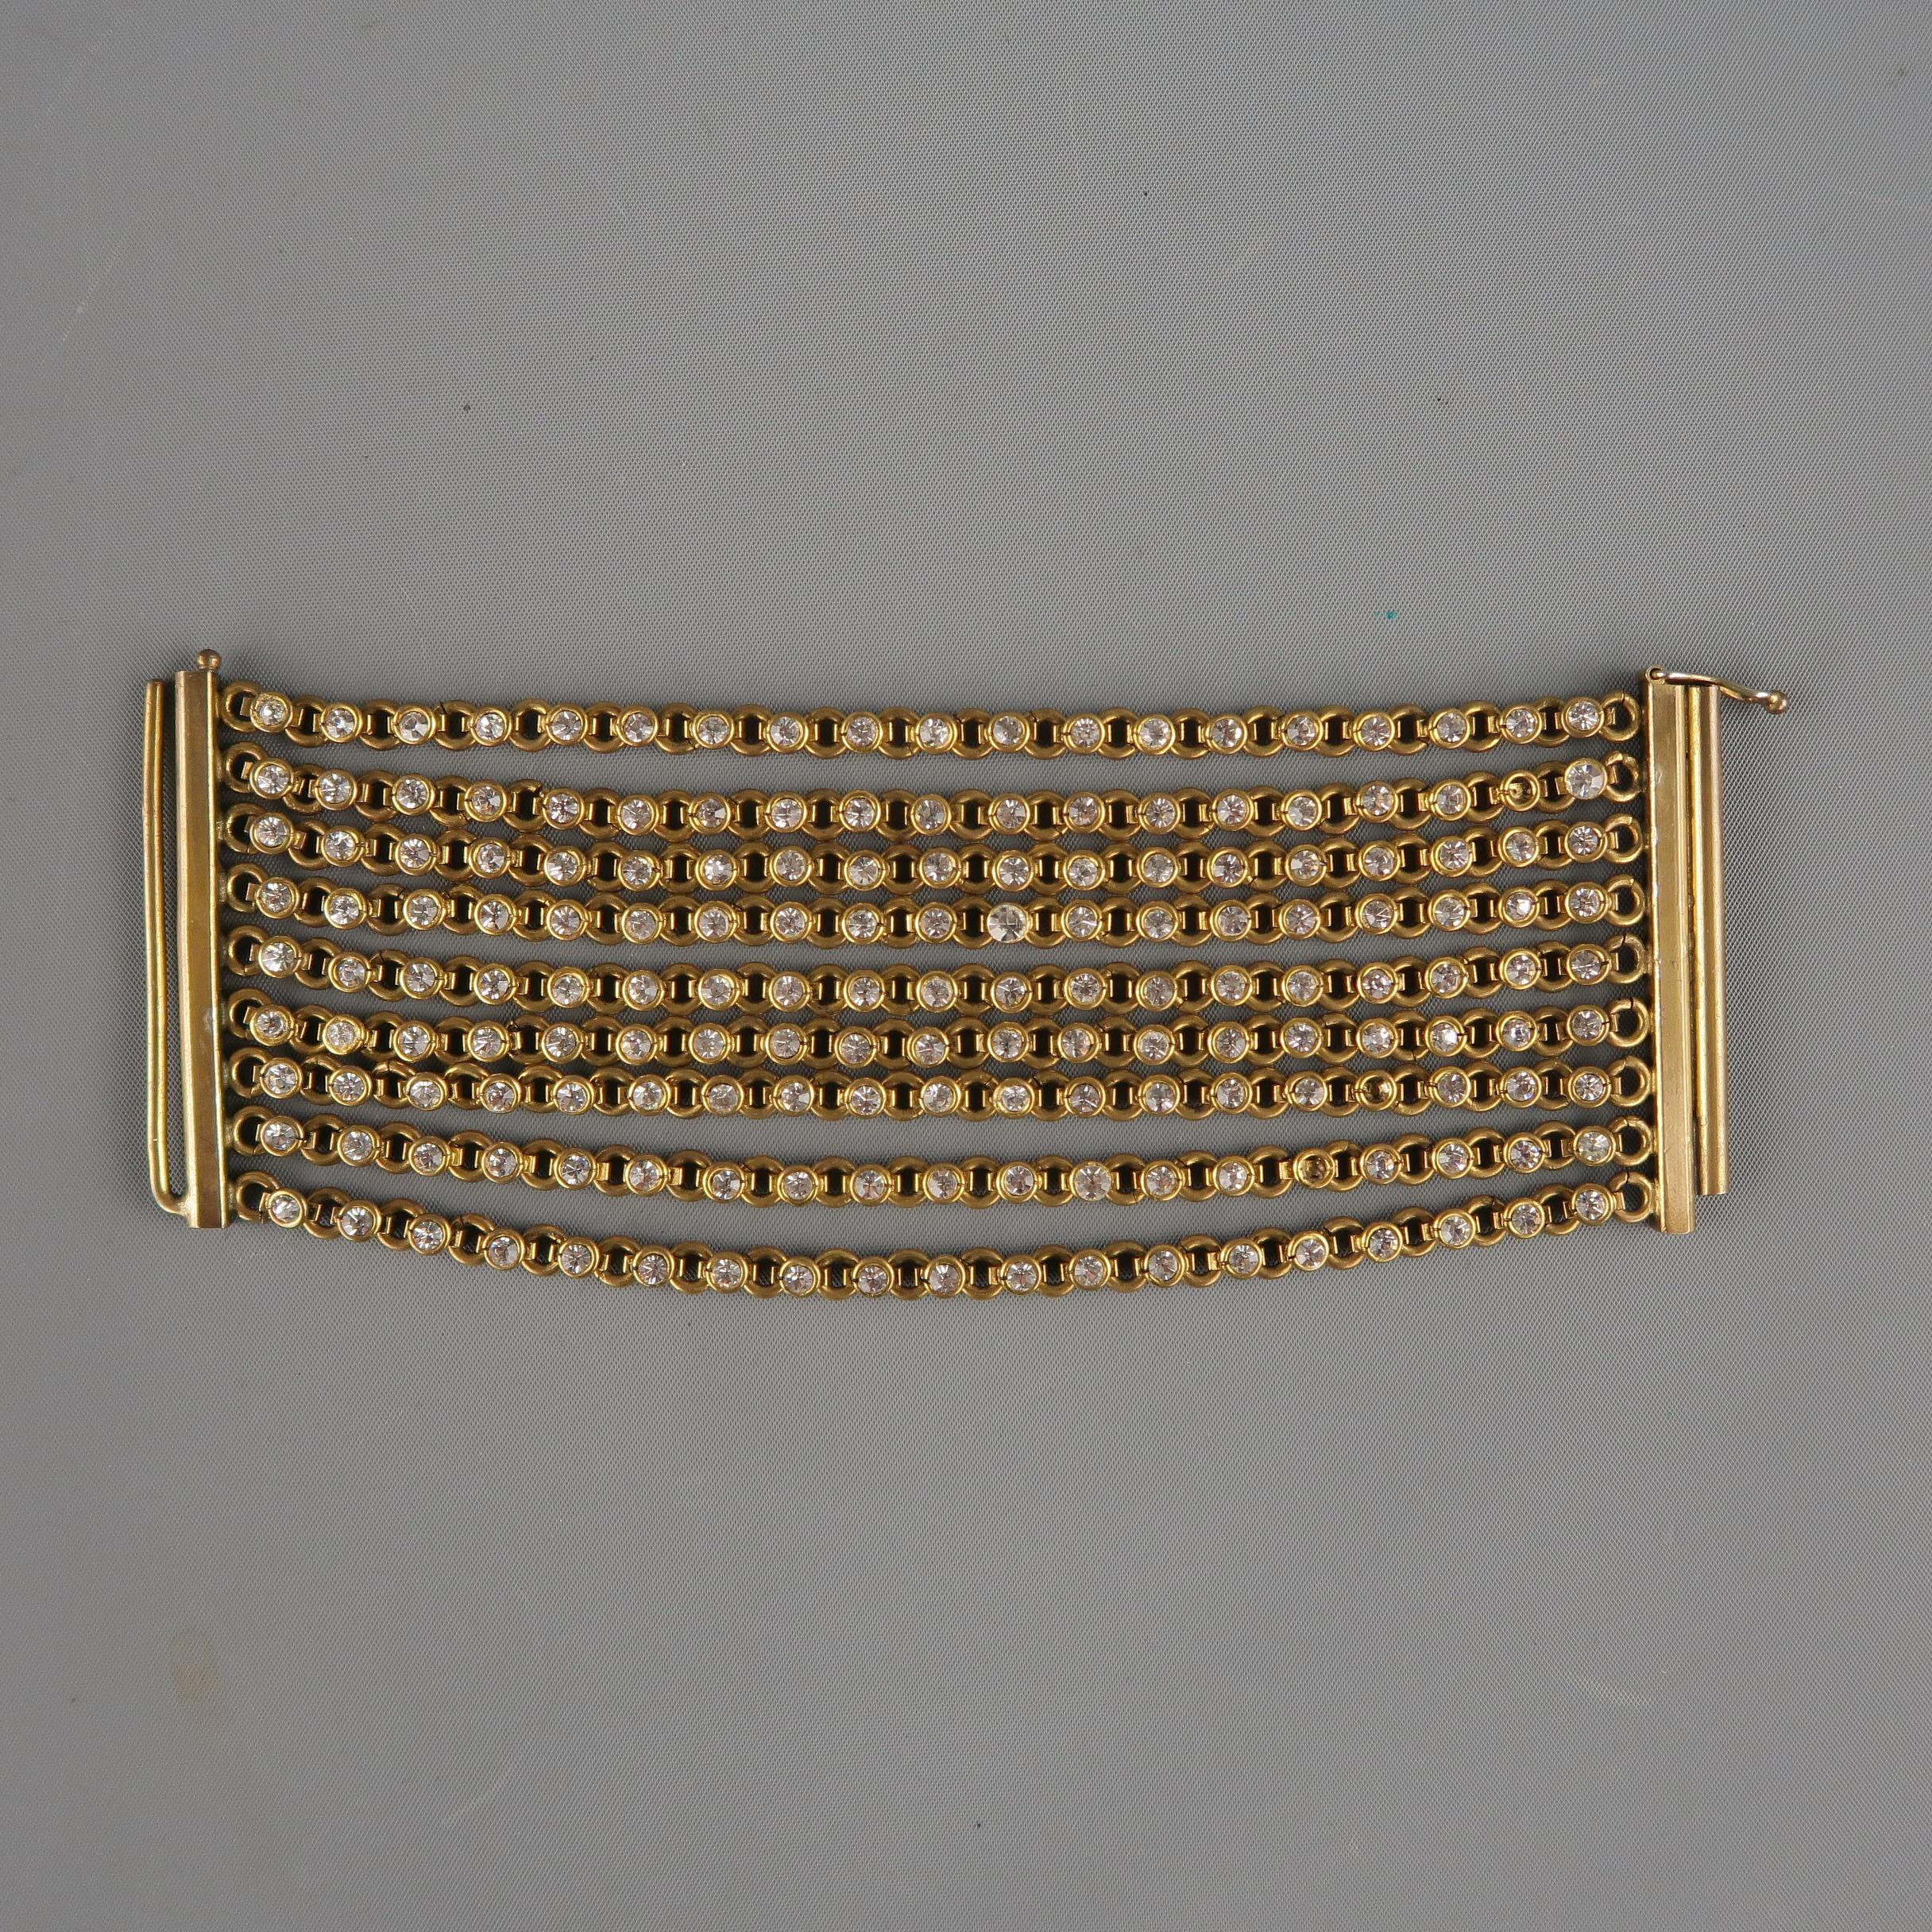 Vintage Mid-century CHANEL cuff bracelet comes in antique gold tone bras and features nine rows of white rhinestone chain strands with rod clasp closure. Minor wear on closure and missing three stones.  Includes a Chanel dust bag.
 
Vintage